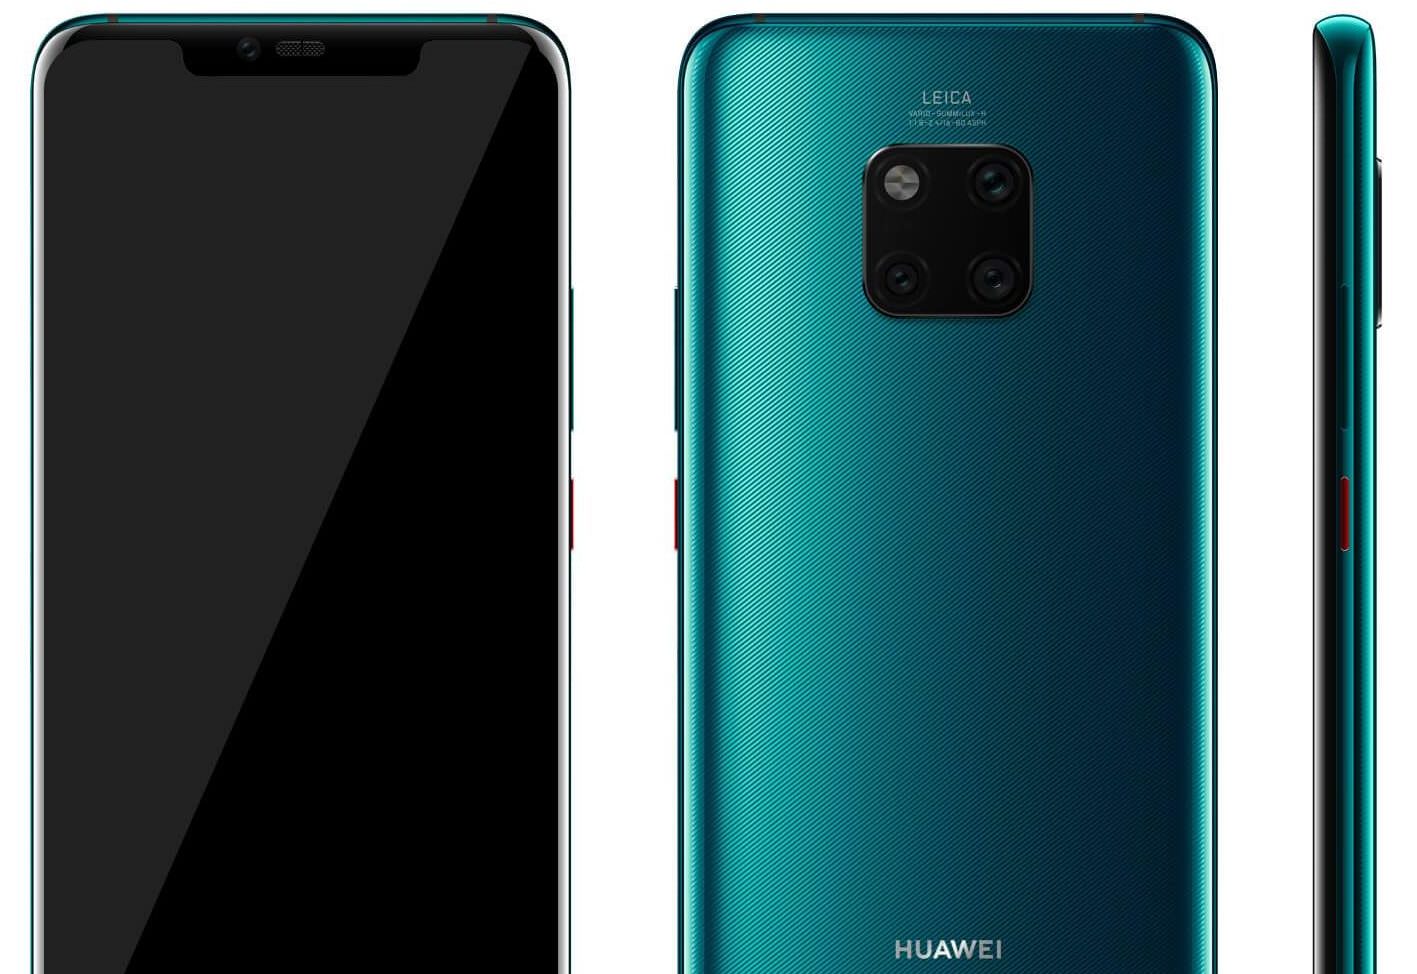 Huawei Mate 20 Pro review - Brilliance with Hiccups [UPDATED]